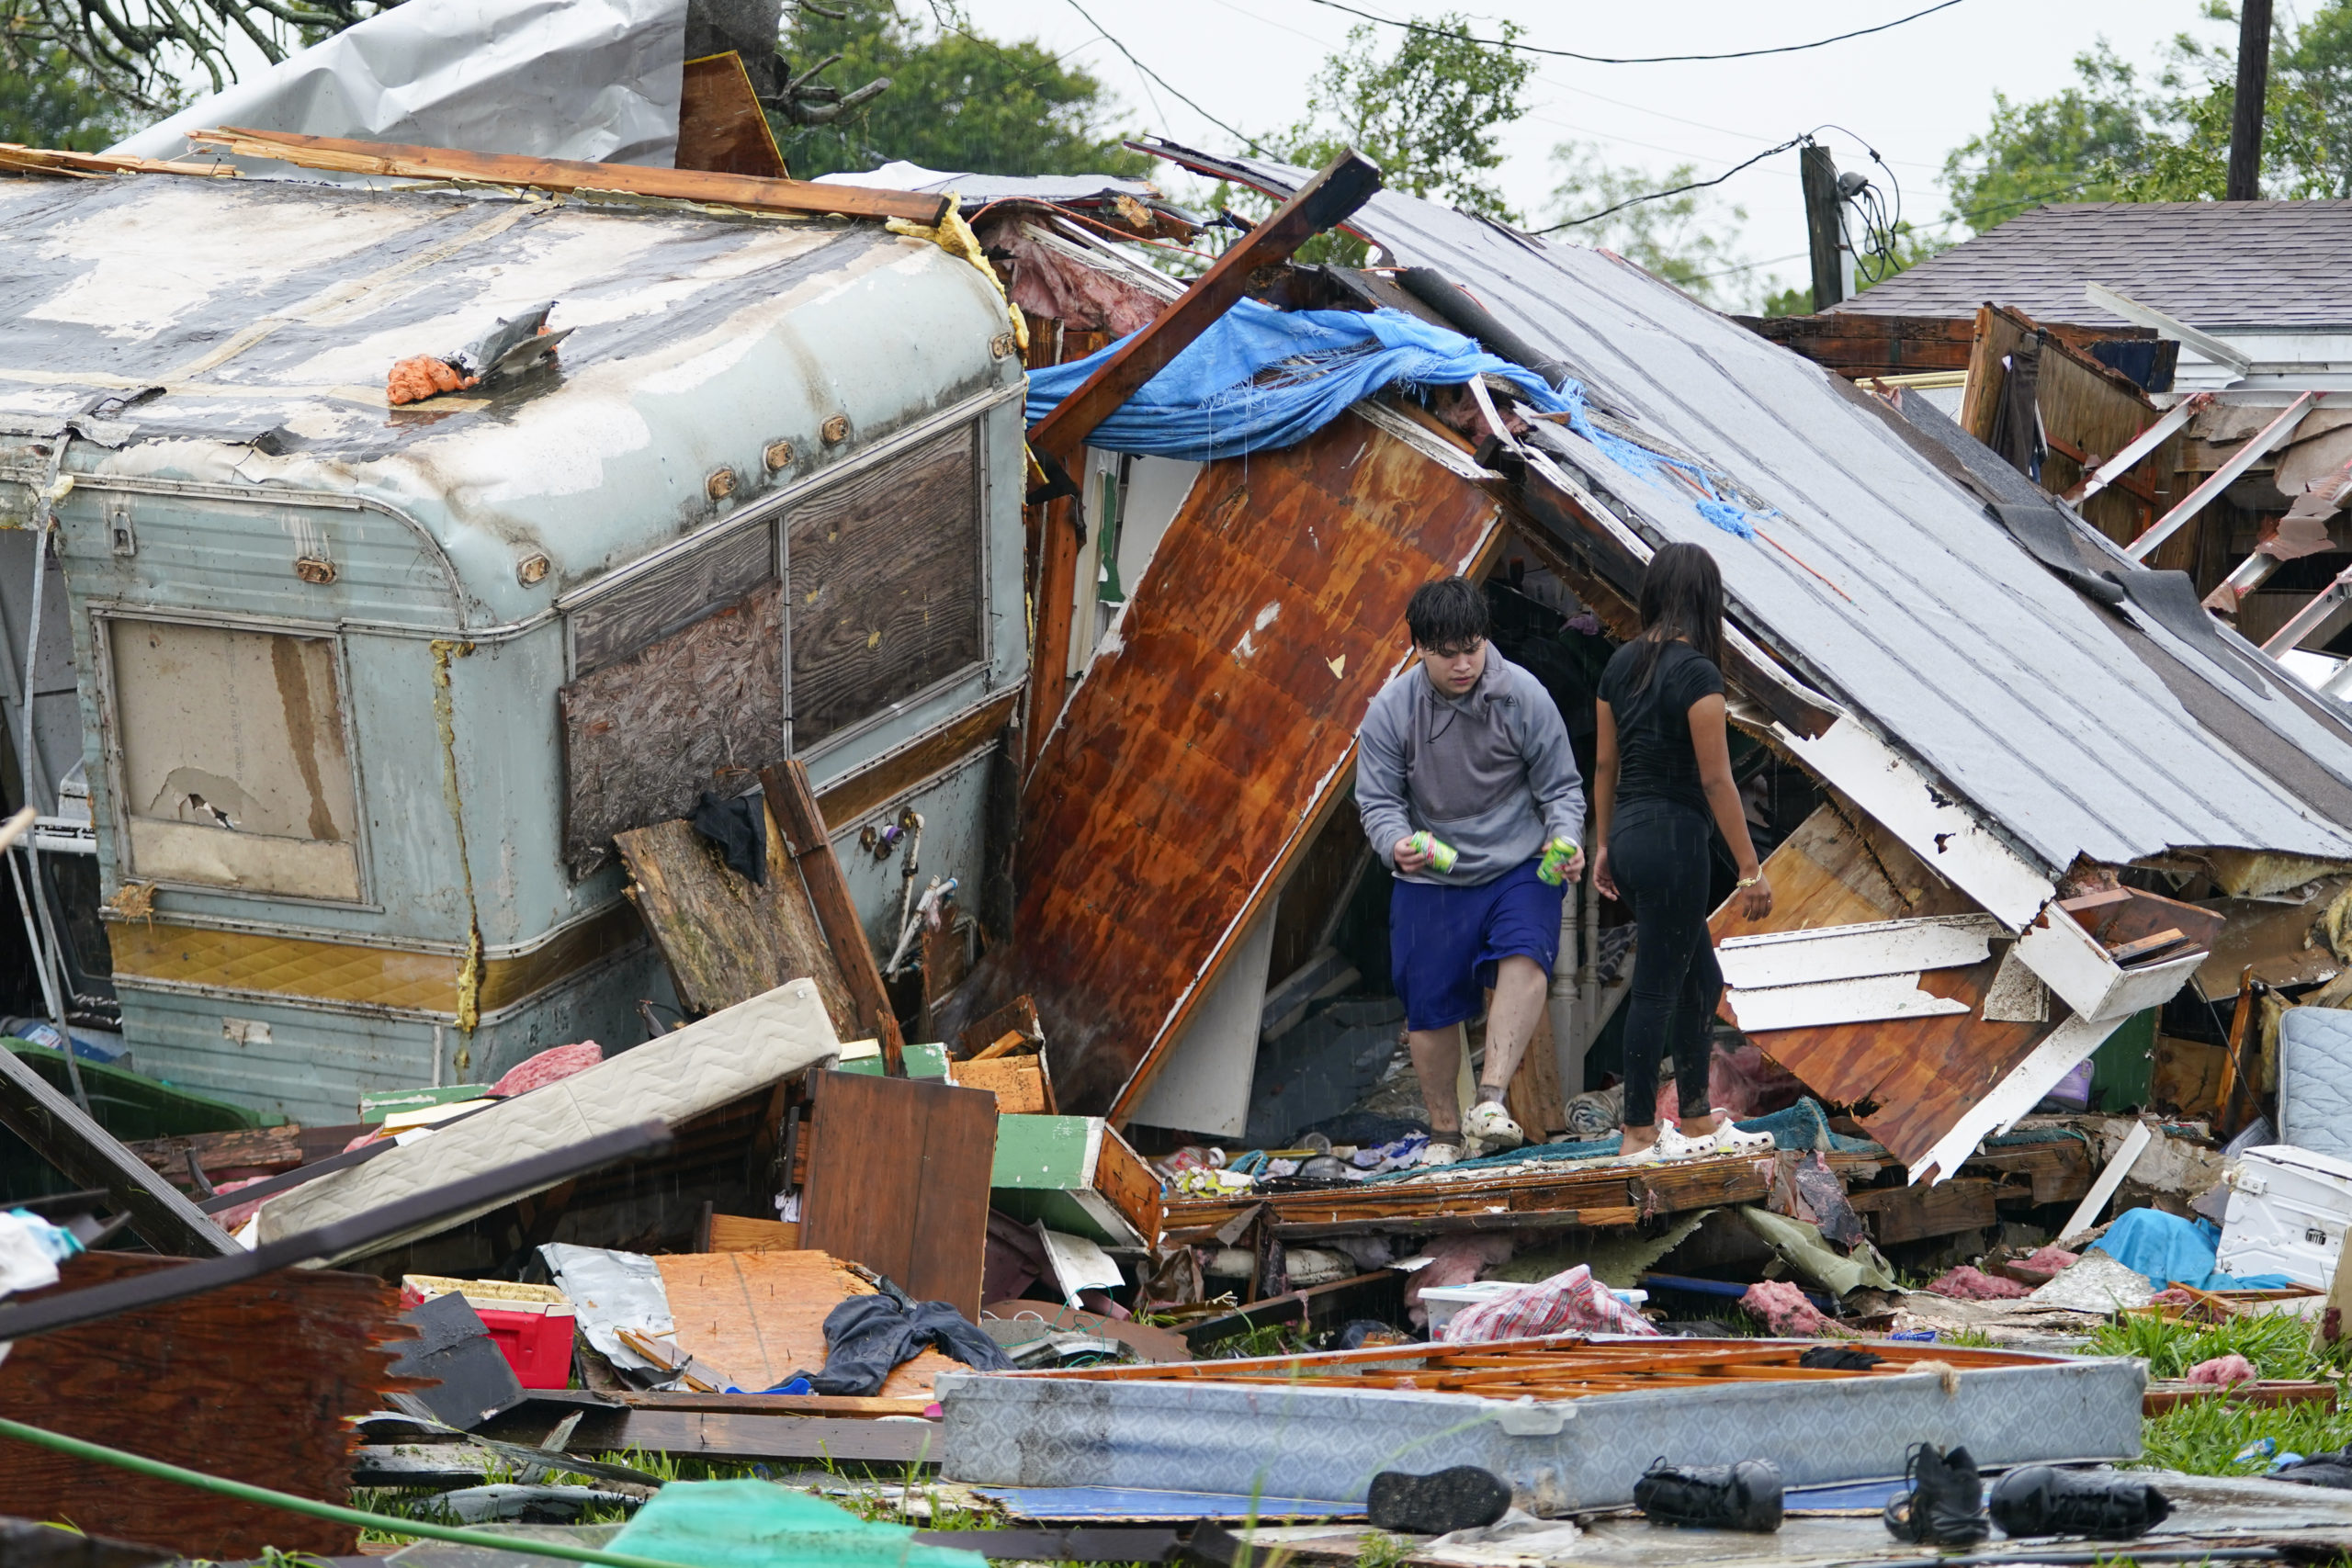 A person stands outside of a damaged home after a tornado hit on Saturday in Laguna Heights, Texas, near South Padre Island. Authorities say one person was killed and several were injured when the tornado struck the southernmost tip of Texas on the Gulf Coast.